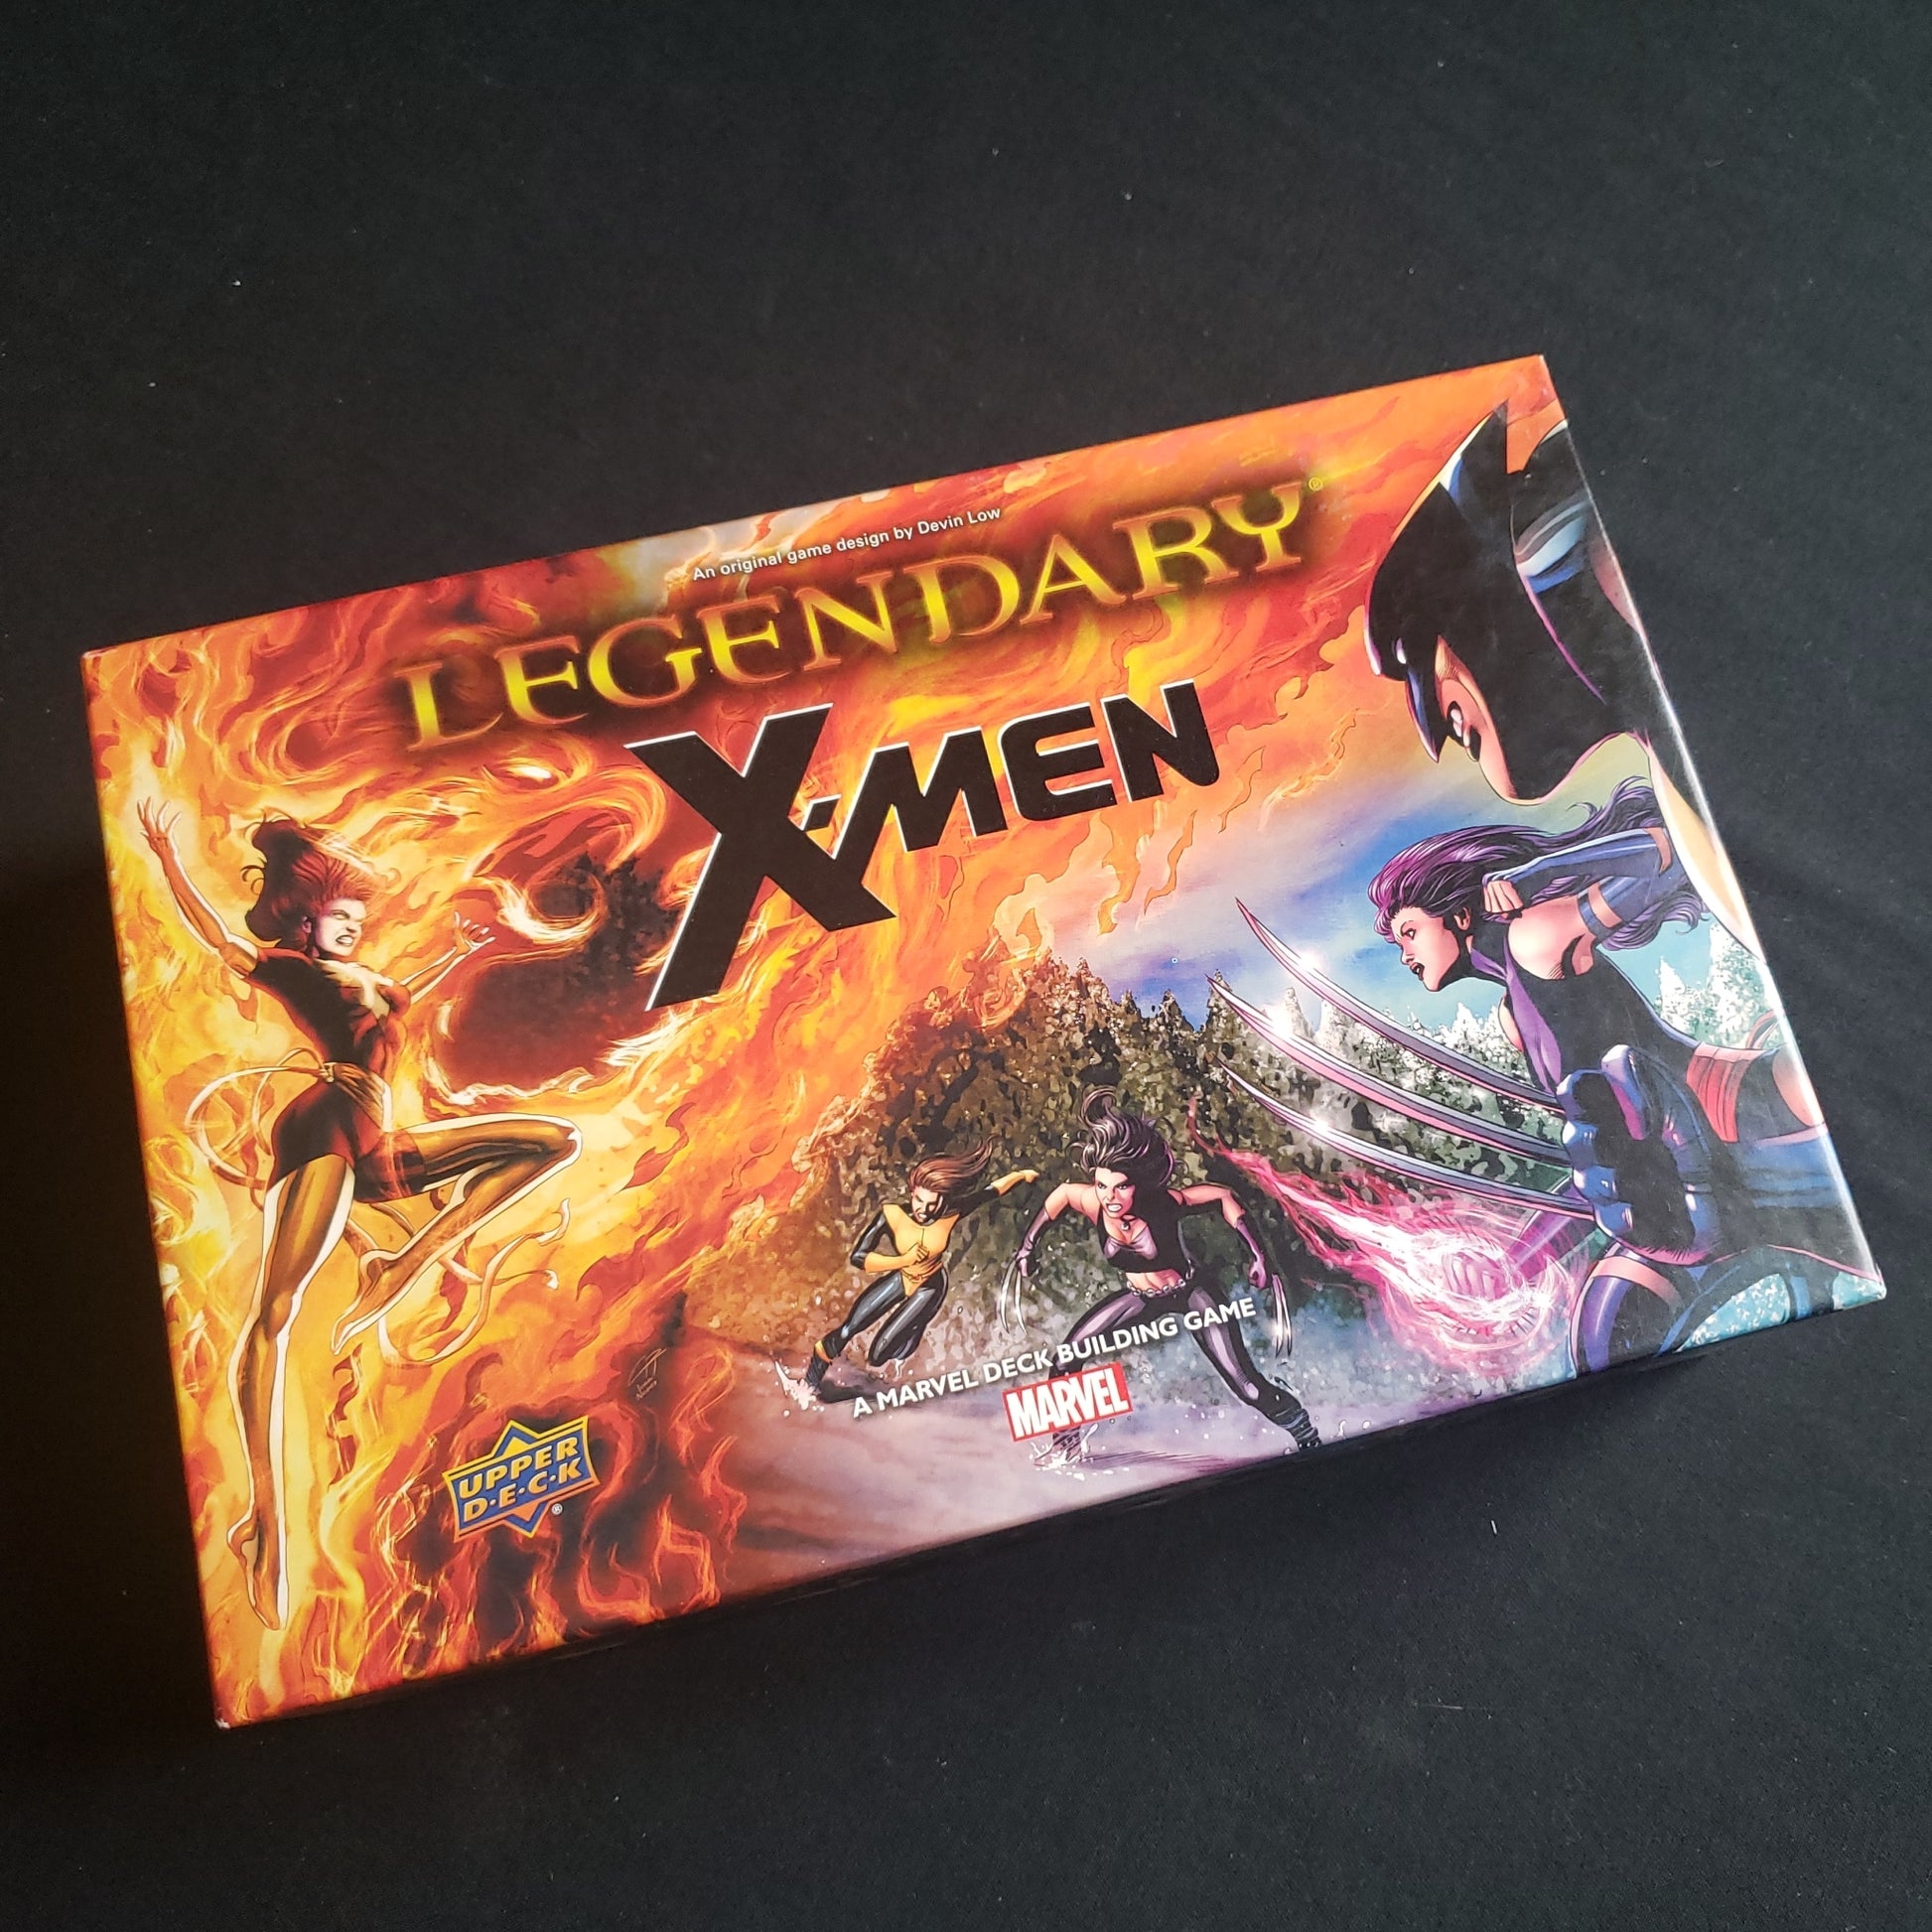 Image shows the front of the box for the X-Men expansion for the card game Legendary Marvel